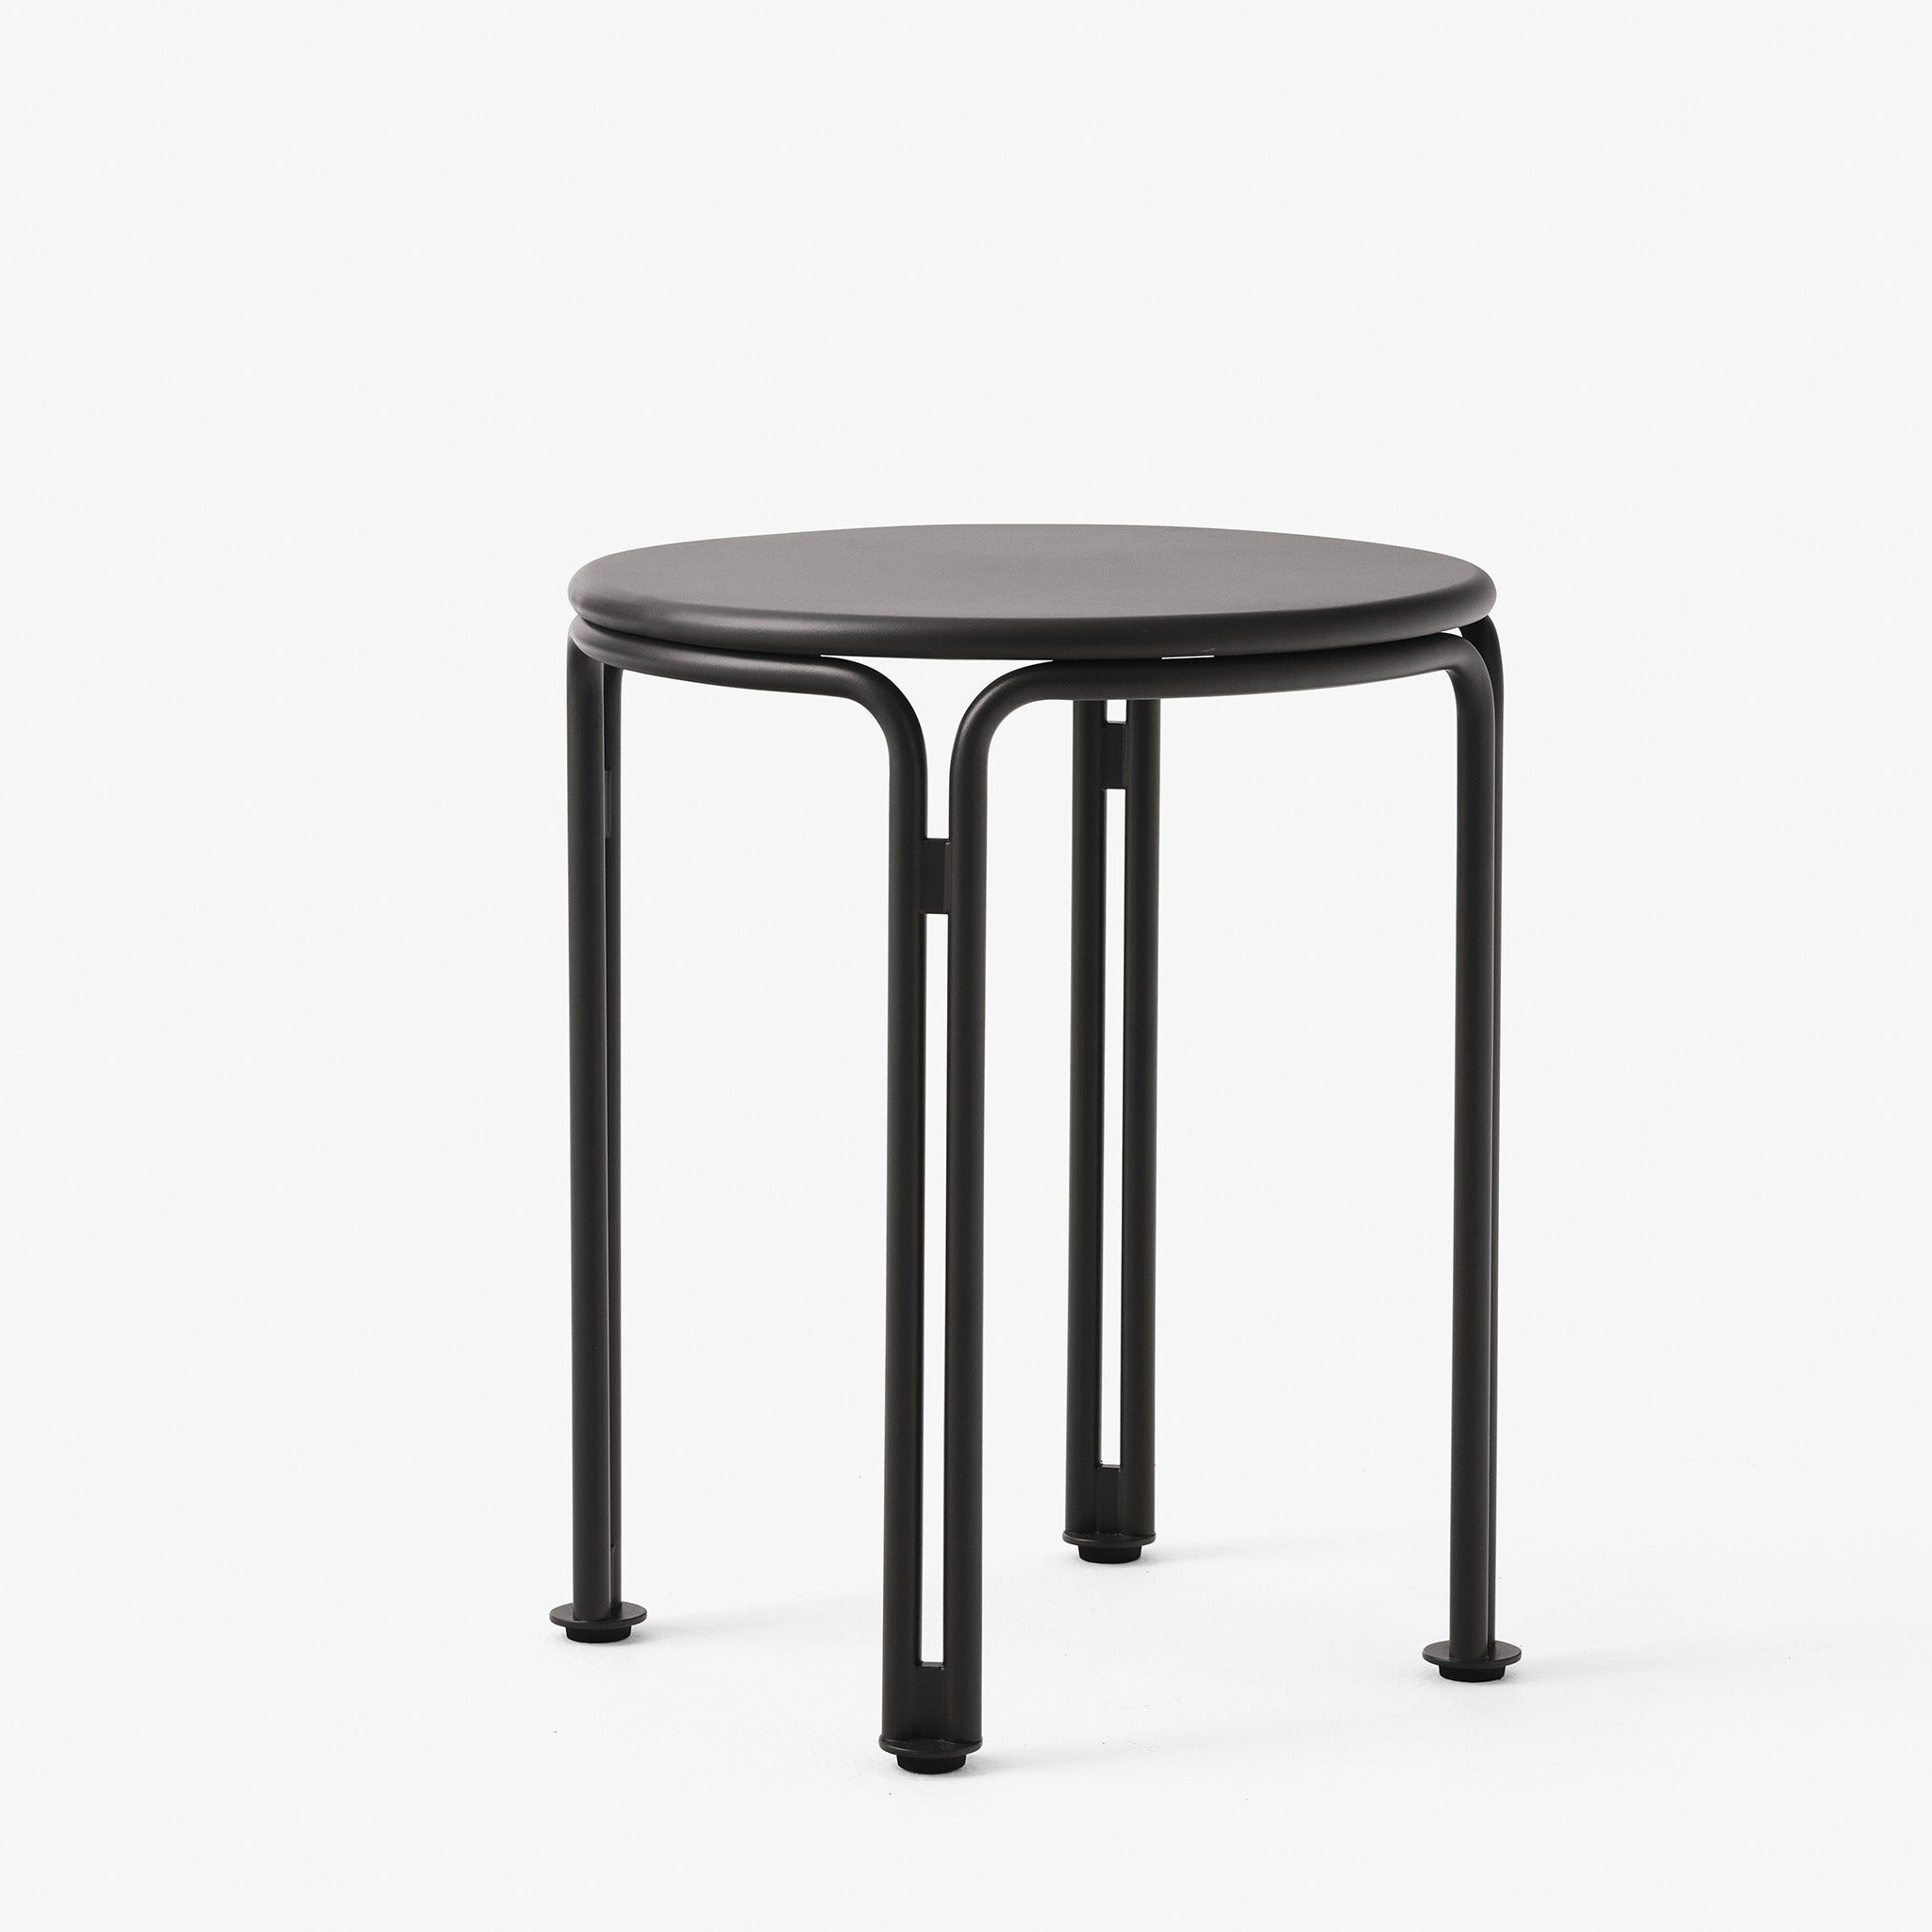 Thorvald SC102 Side Table Ø40 by Space Copenhagen